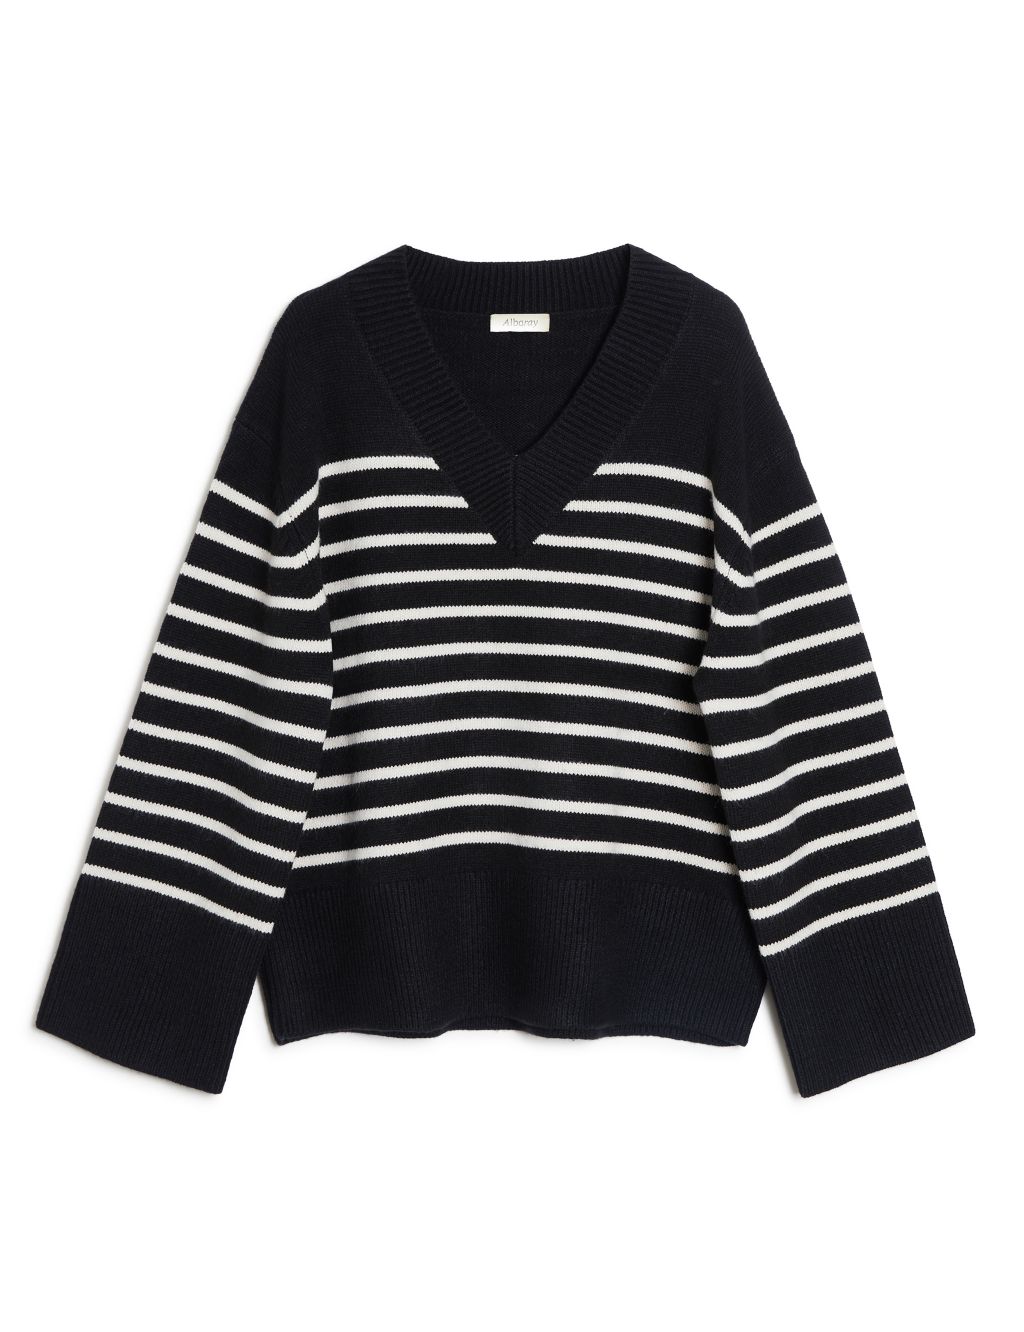 Striped V-Neck Jumper with Wool image 2